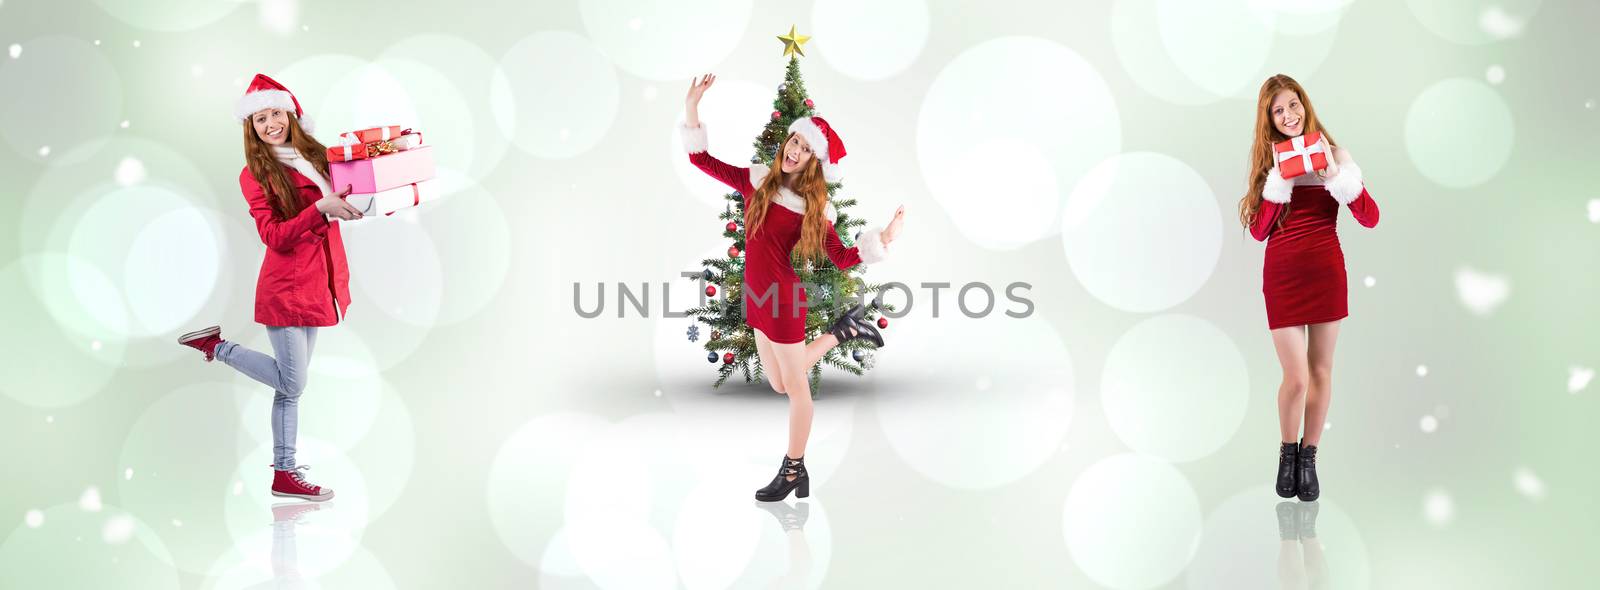 Composite image of festive redhead smiling at camera by Wavebreakmedia